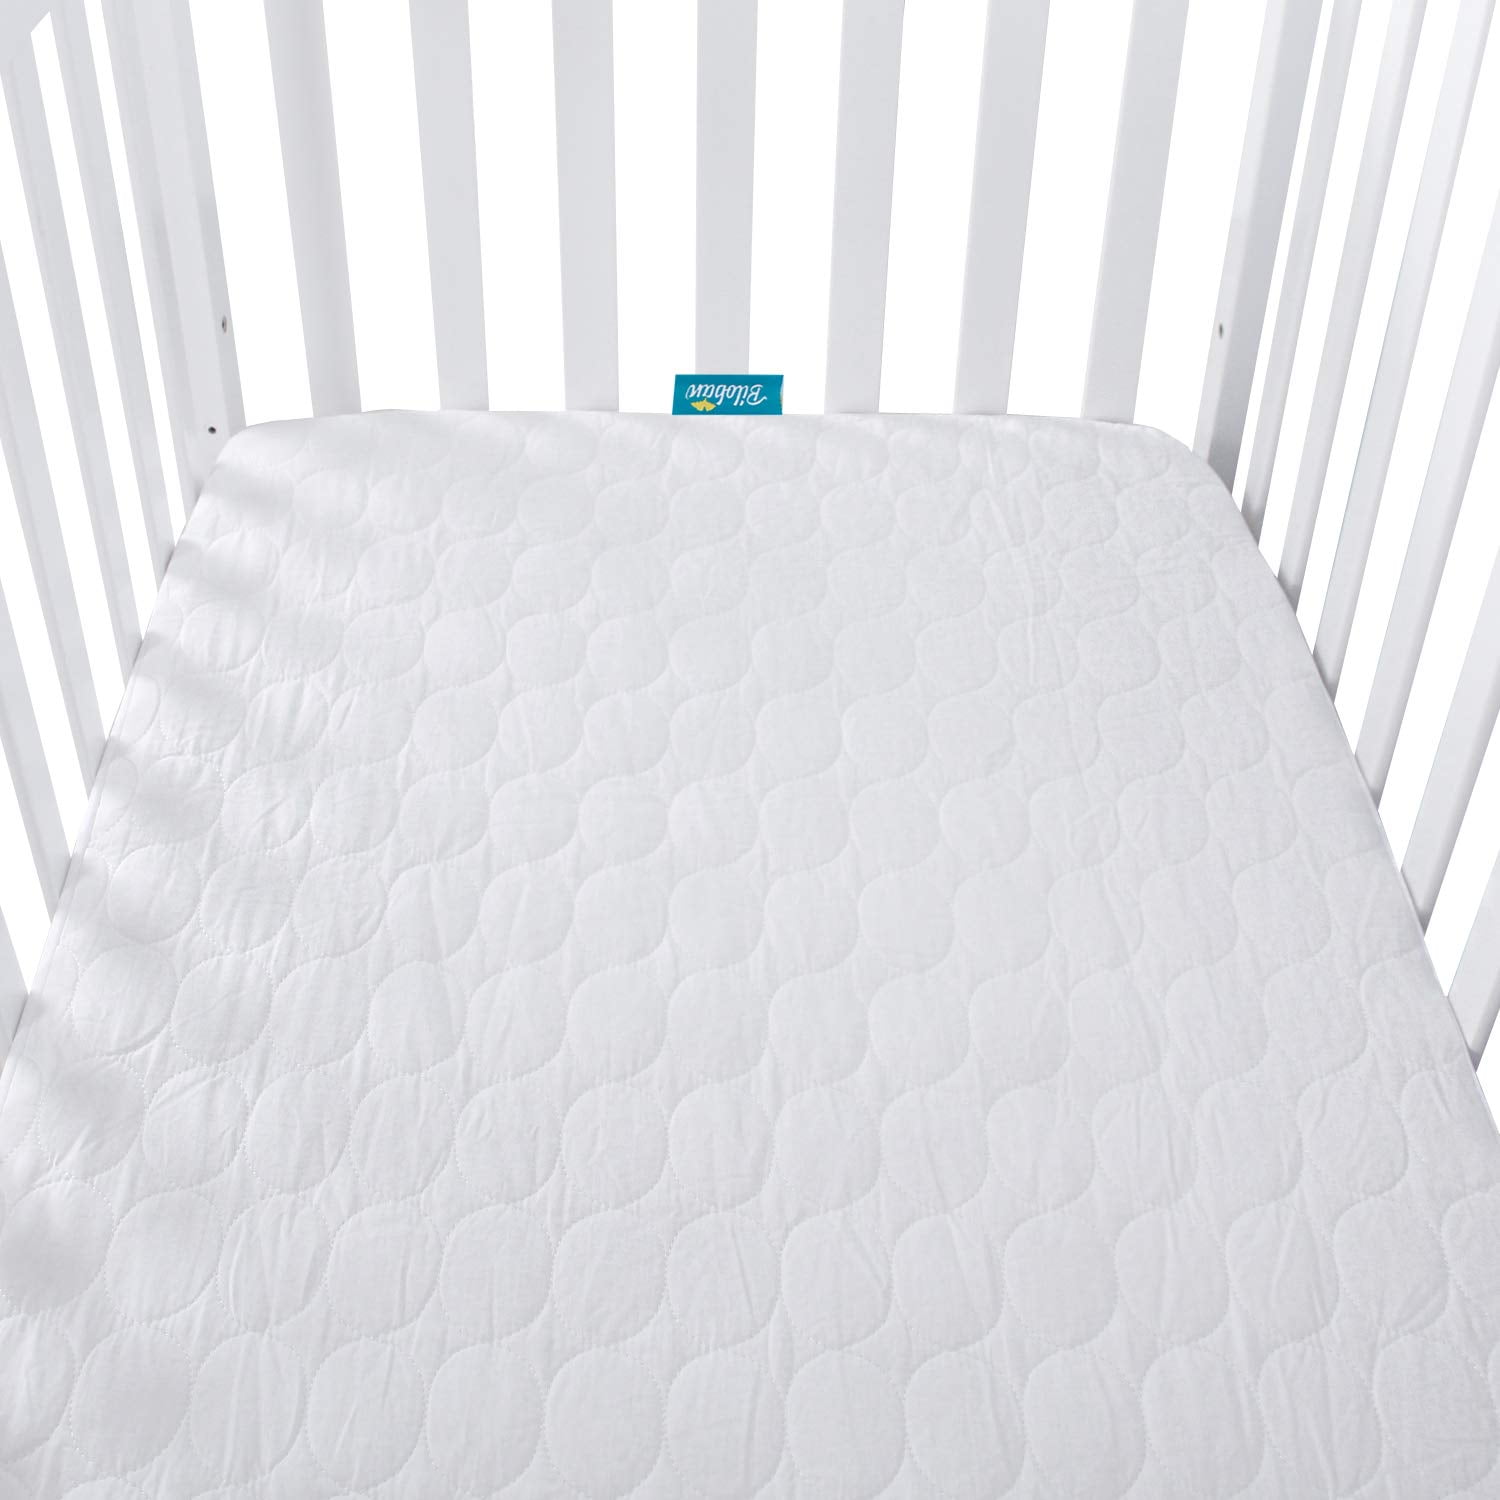 Bamboo Rayon Baby Crib Mattress Protector - Waterproof Fitted Toddler Bed  Mattress Cover 28x52 inches - Padded Absorbent Bed Liner- Stain Protector